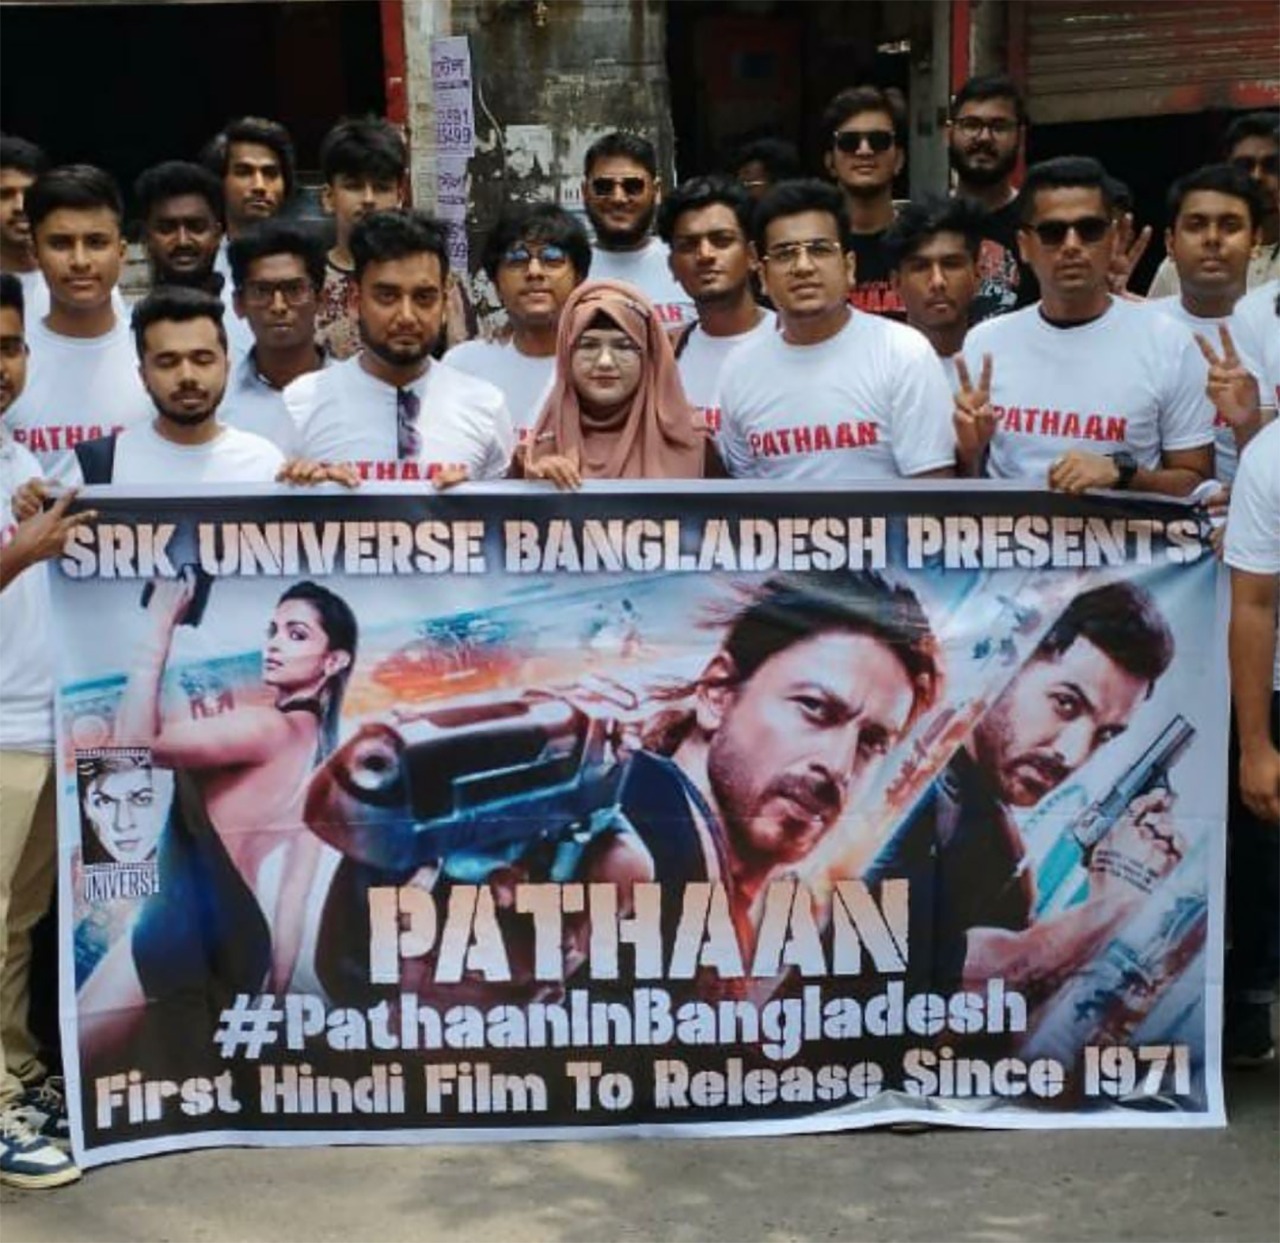 Pathaan Box Office: Shah Rukh Khan-starrer takes a TERRIFIC opening in Bangladesh; grosses 25 lakhs Bangladeshi takas [Rs. 19.13 lakhs] from 41 screens on day 1 : Bollywood News – Bollywood Hungama